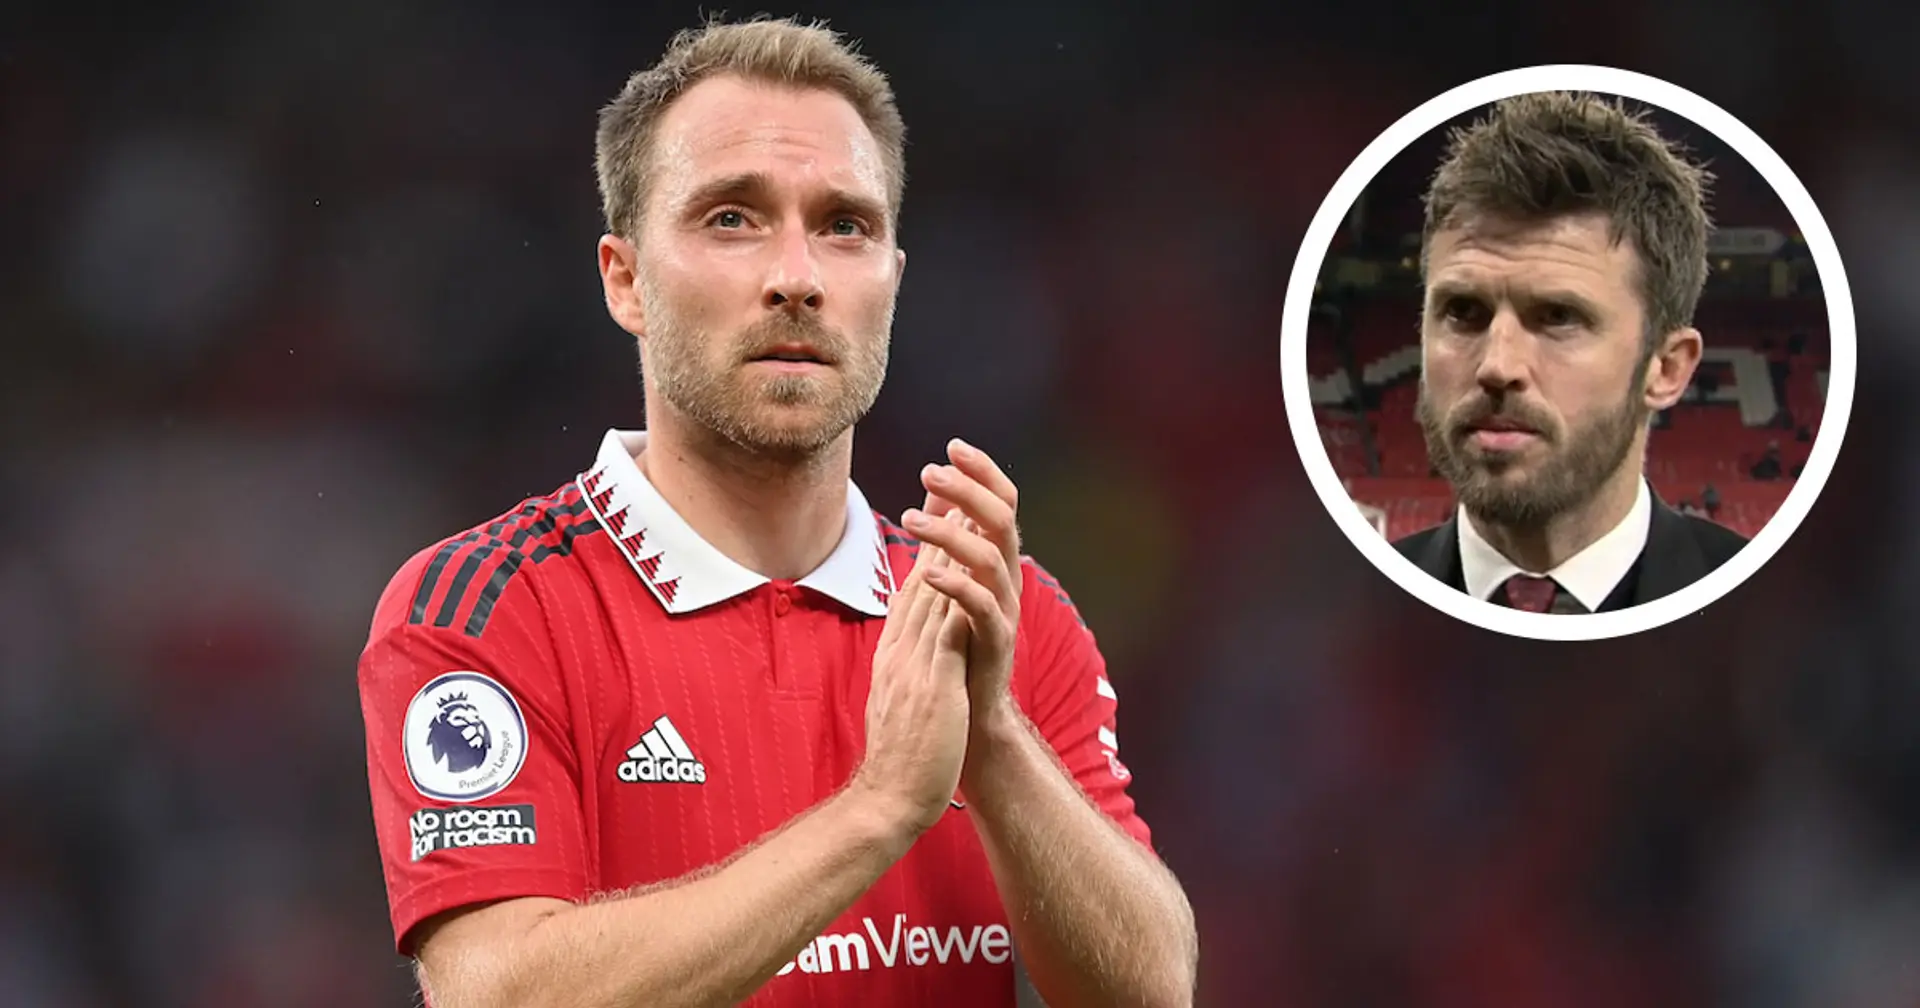 'I watched him a lot': Michael Carrick gives verdict on Eriksen's impressive start to United career